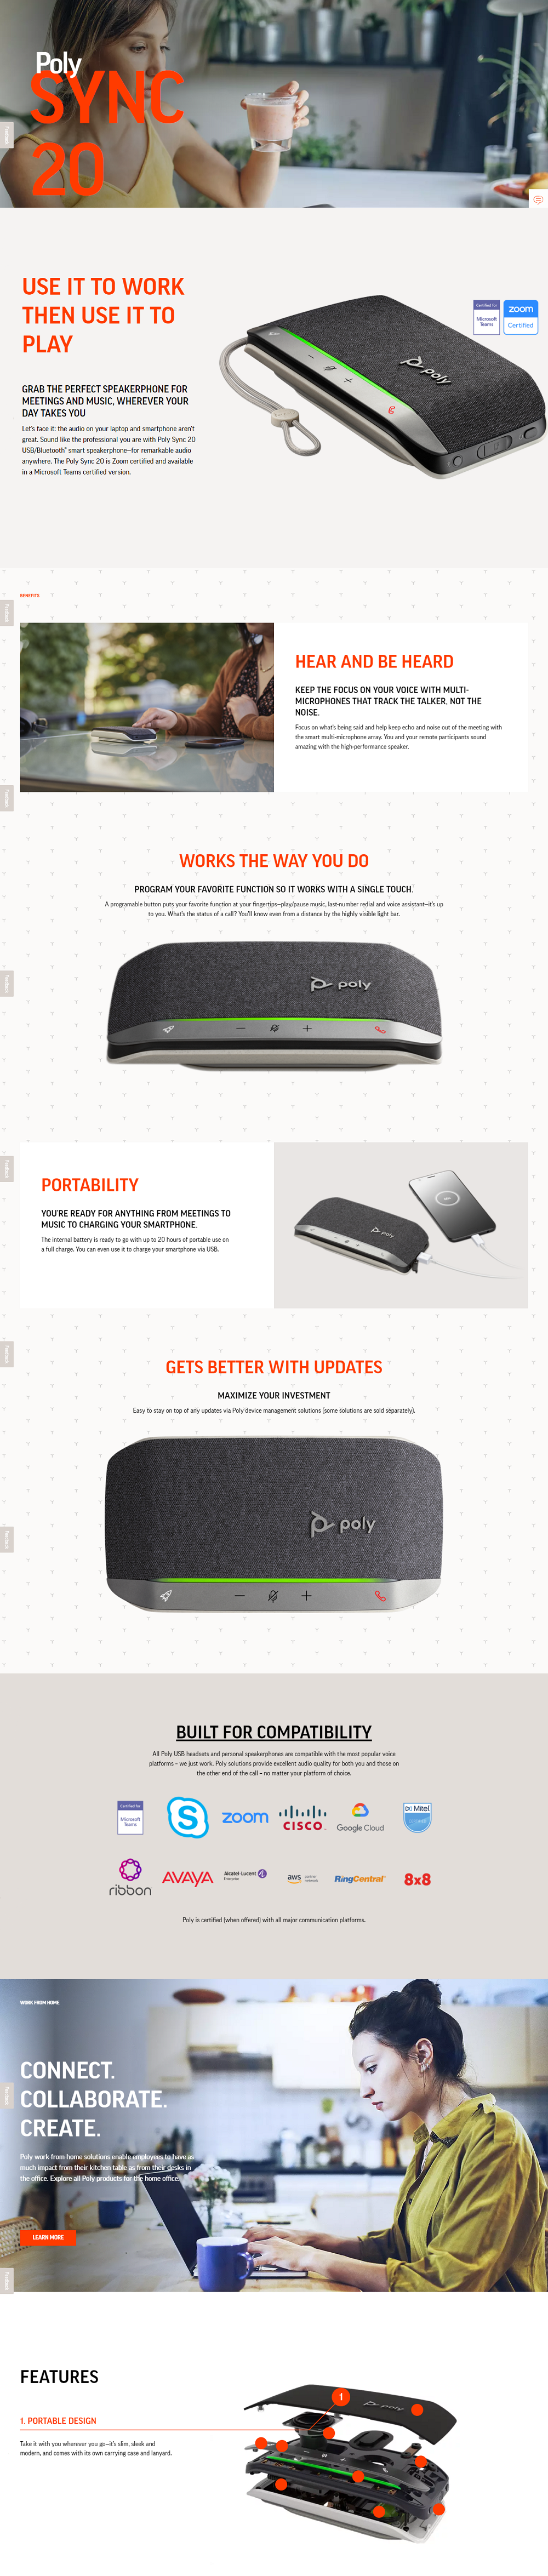 POLY SYNC Bluetooth 20 + USB-A Challenger Smart 216865-01 + Dongle Speaker - Singapore